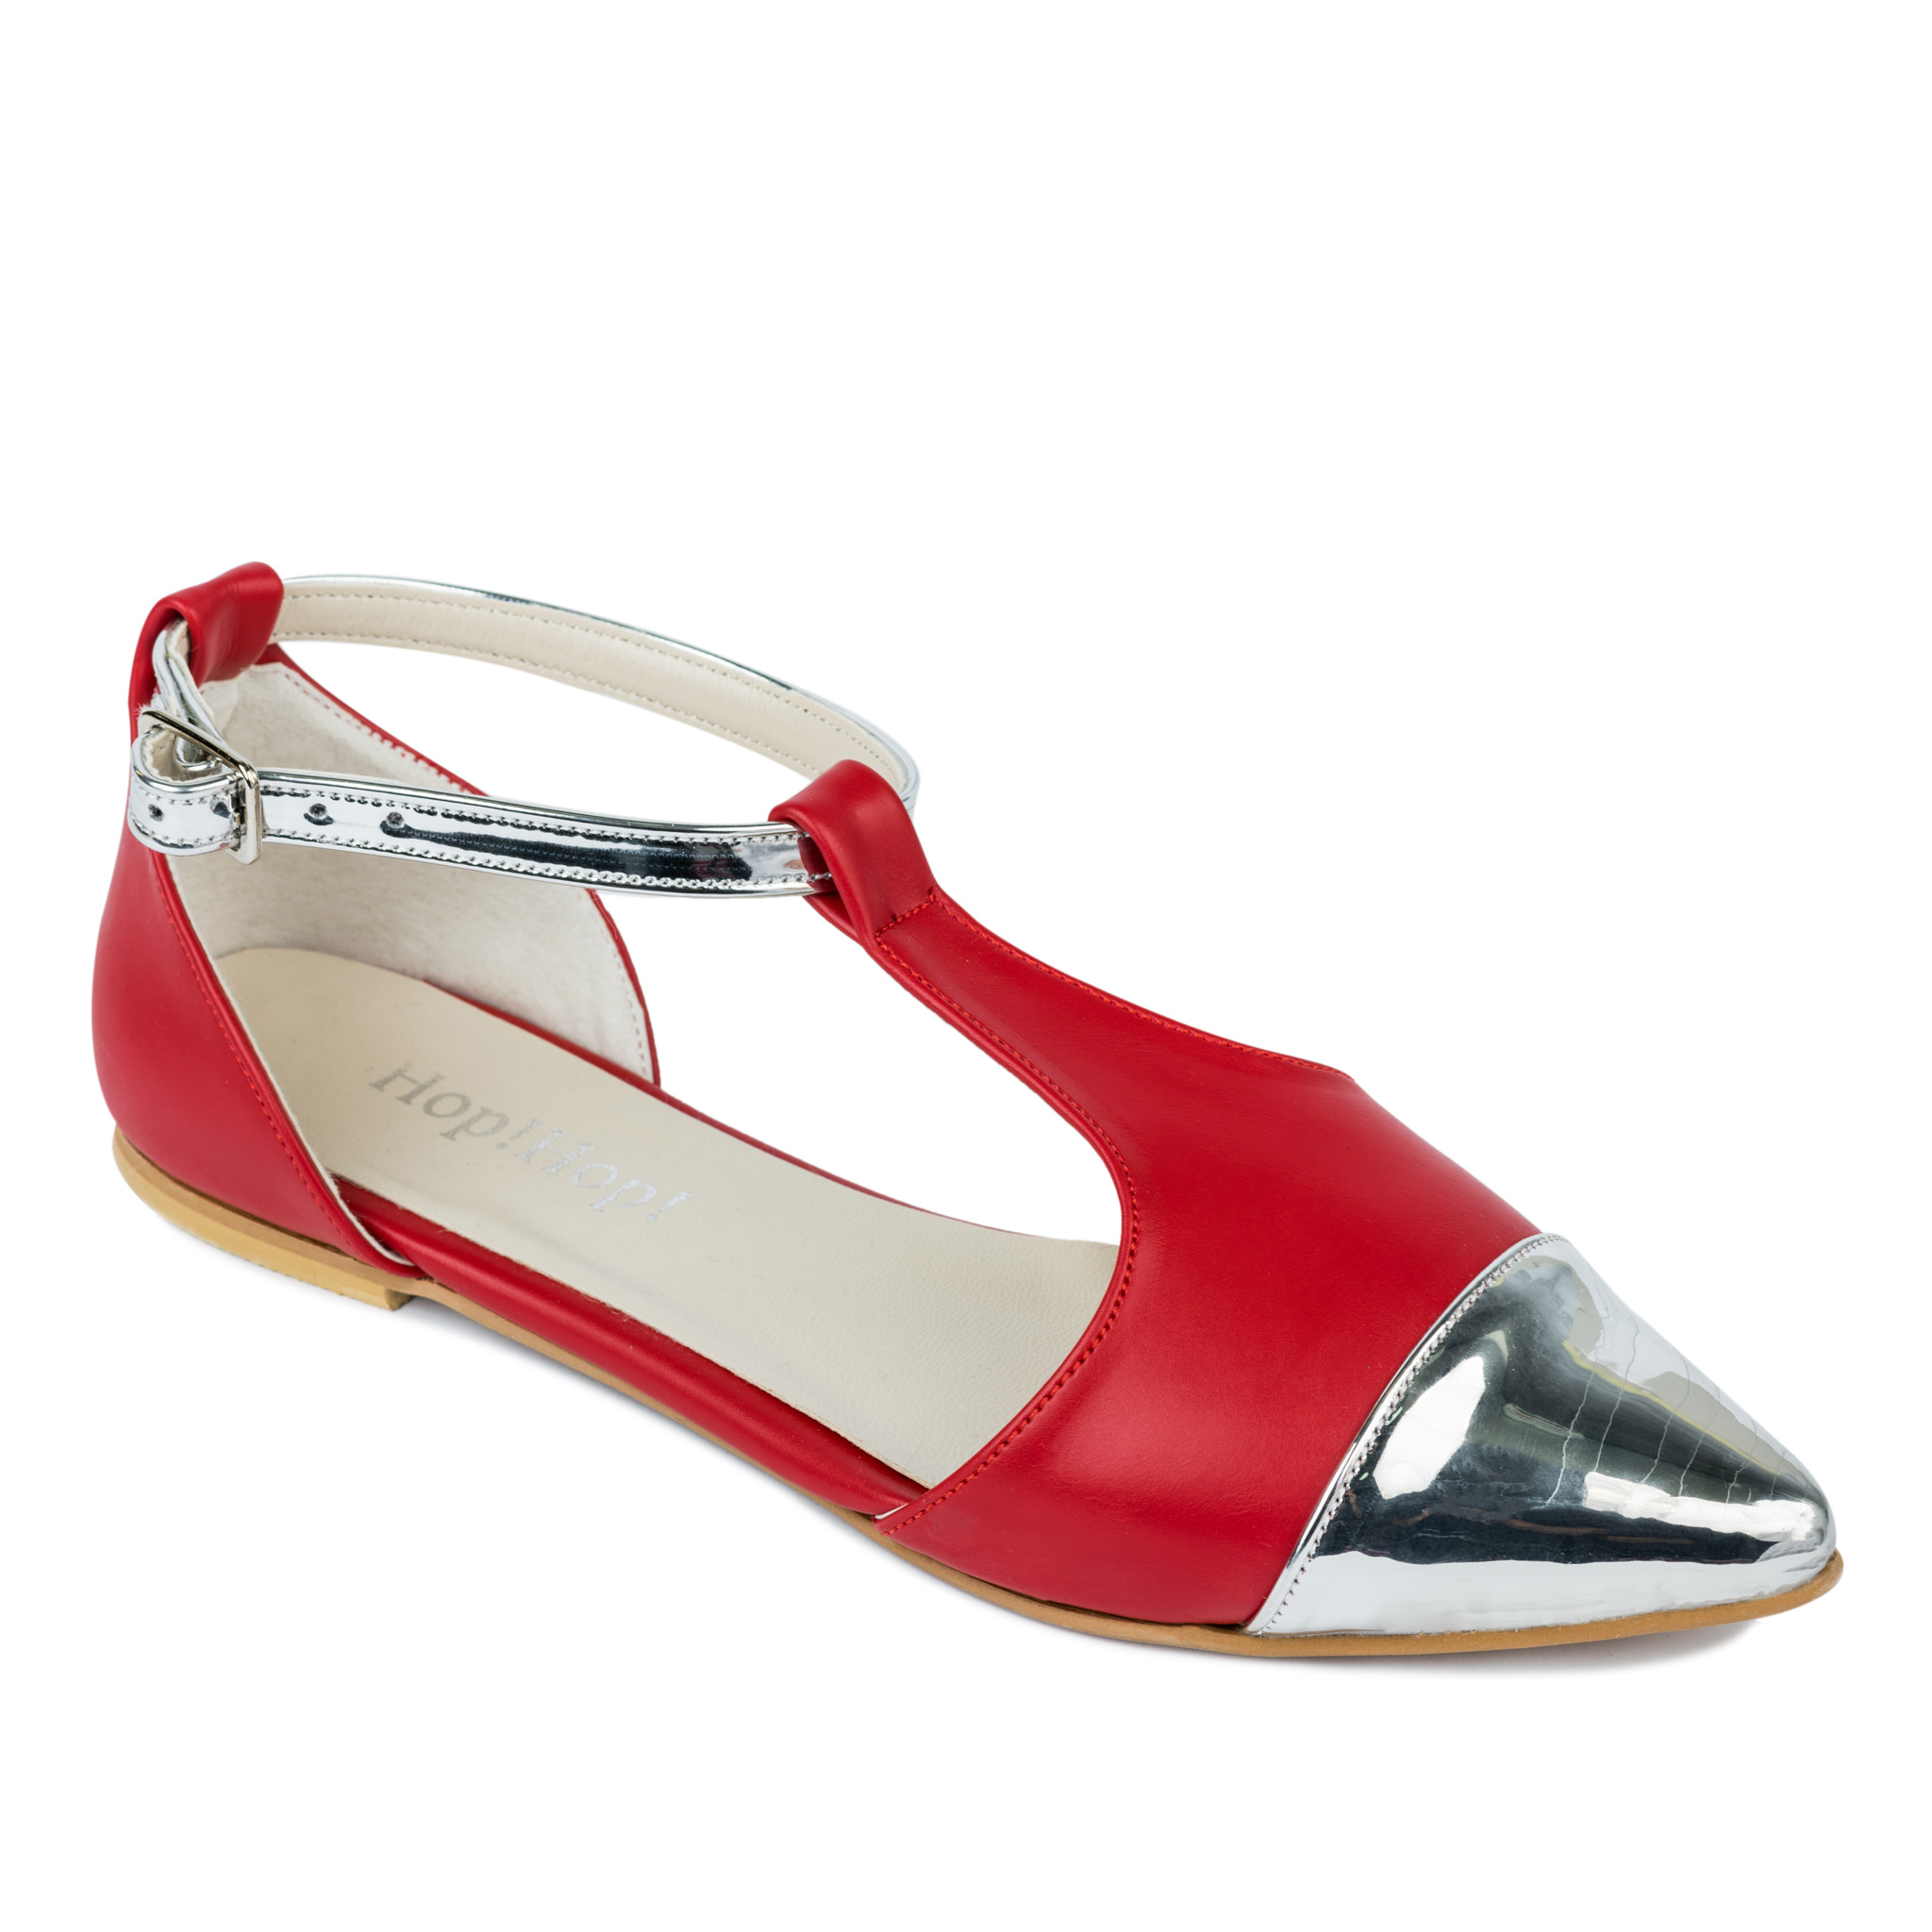 POINTED FLATS WITH BELT - RED